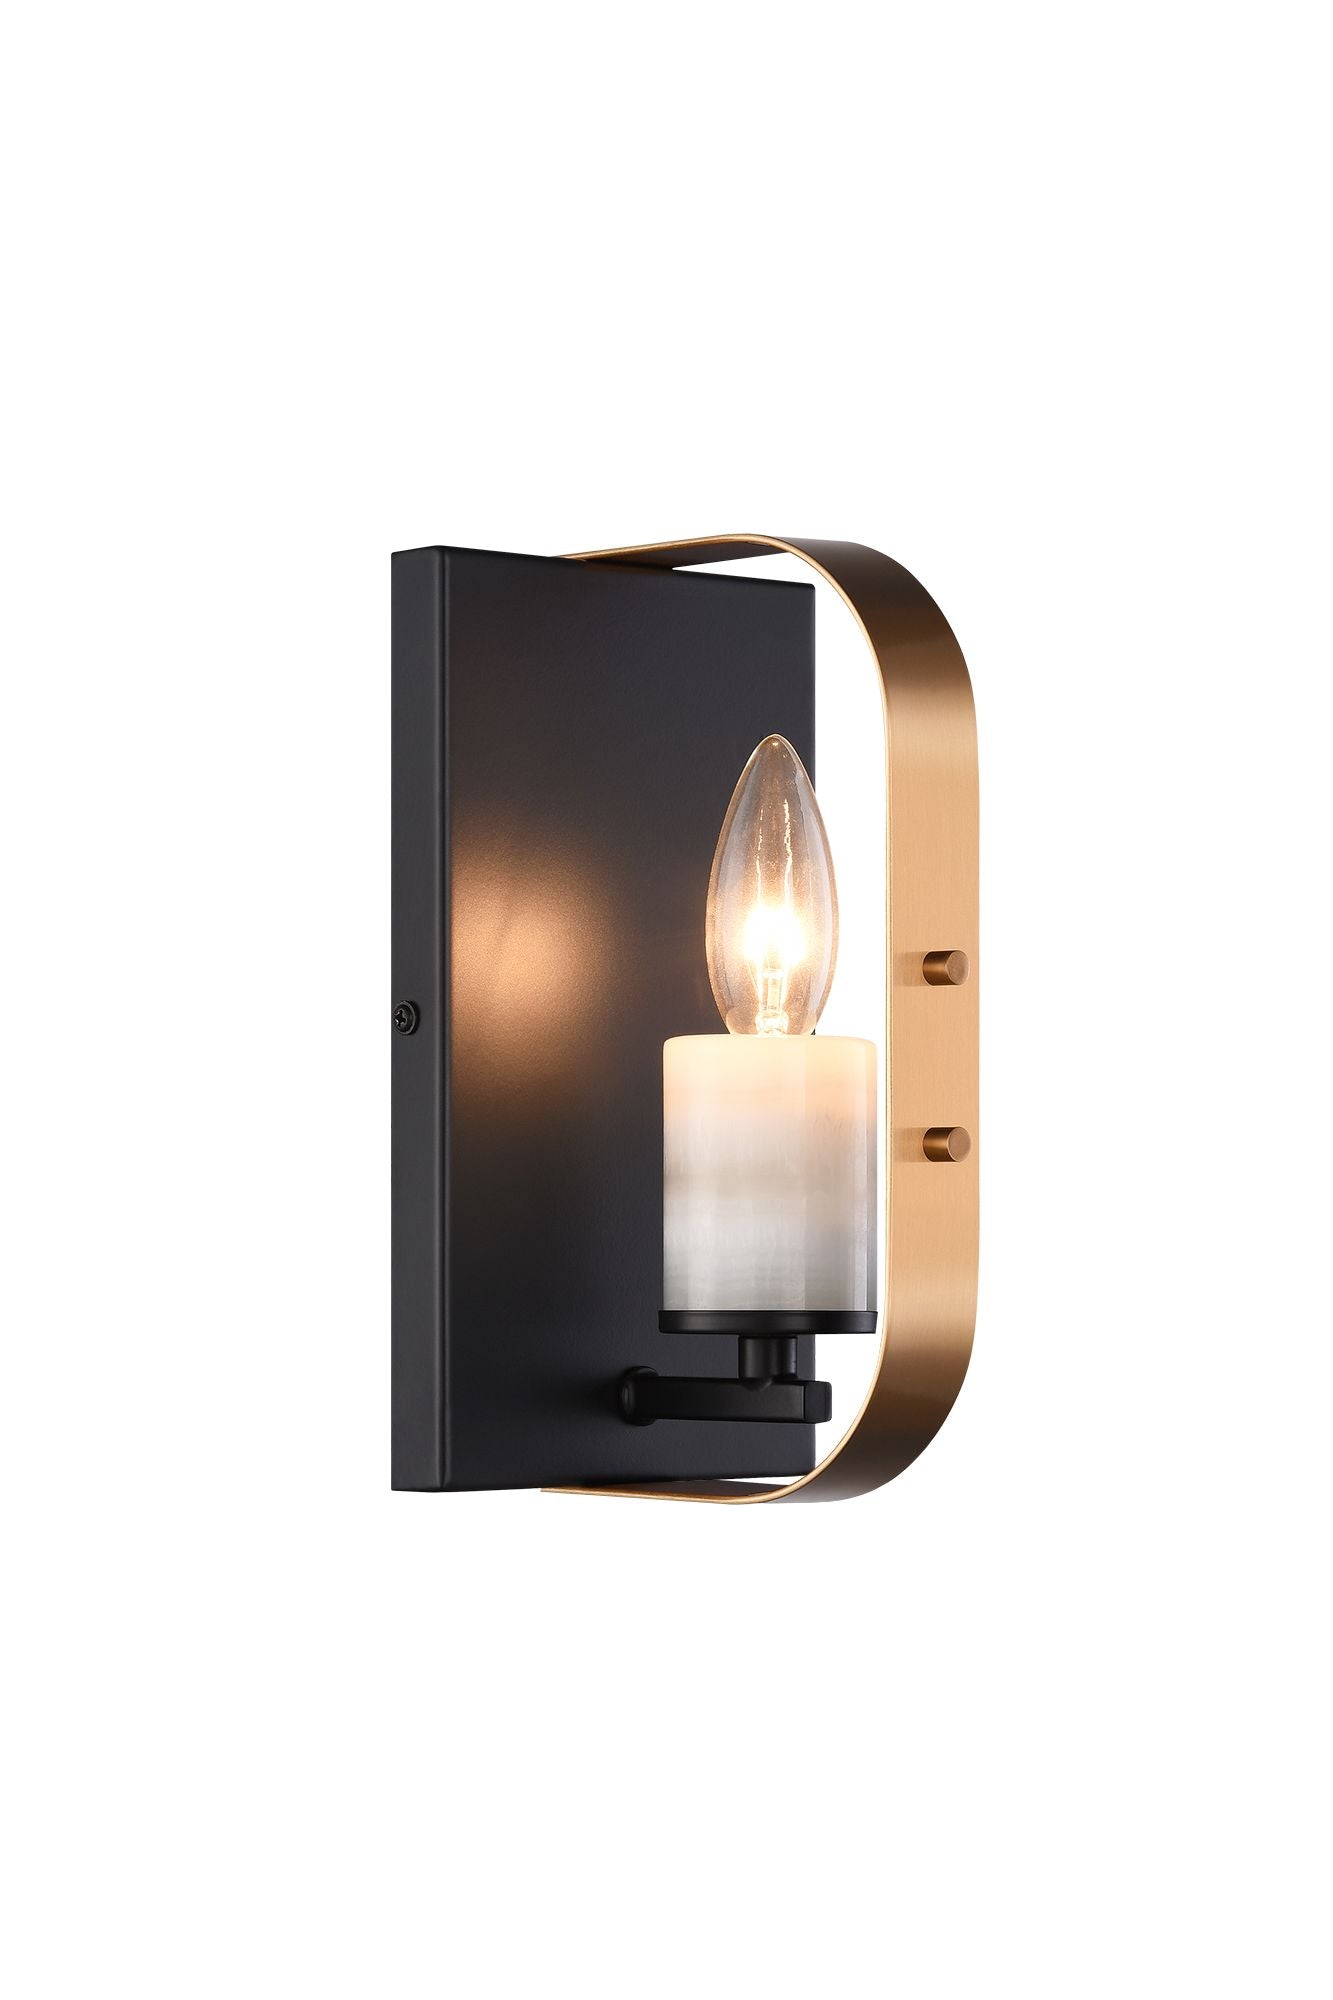 CRANDLE Wall sconce Black, Gold - W82901BKAG | TEO